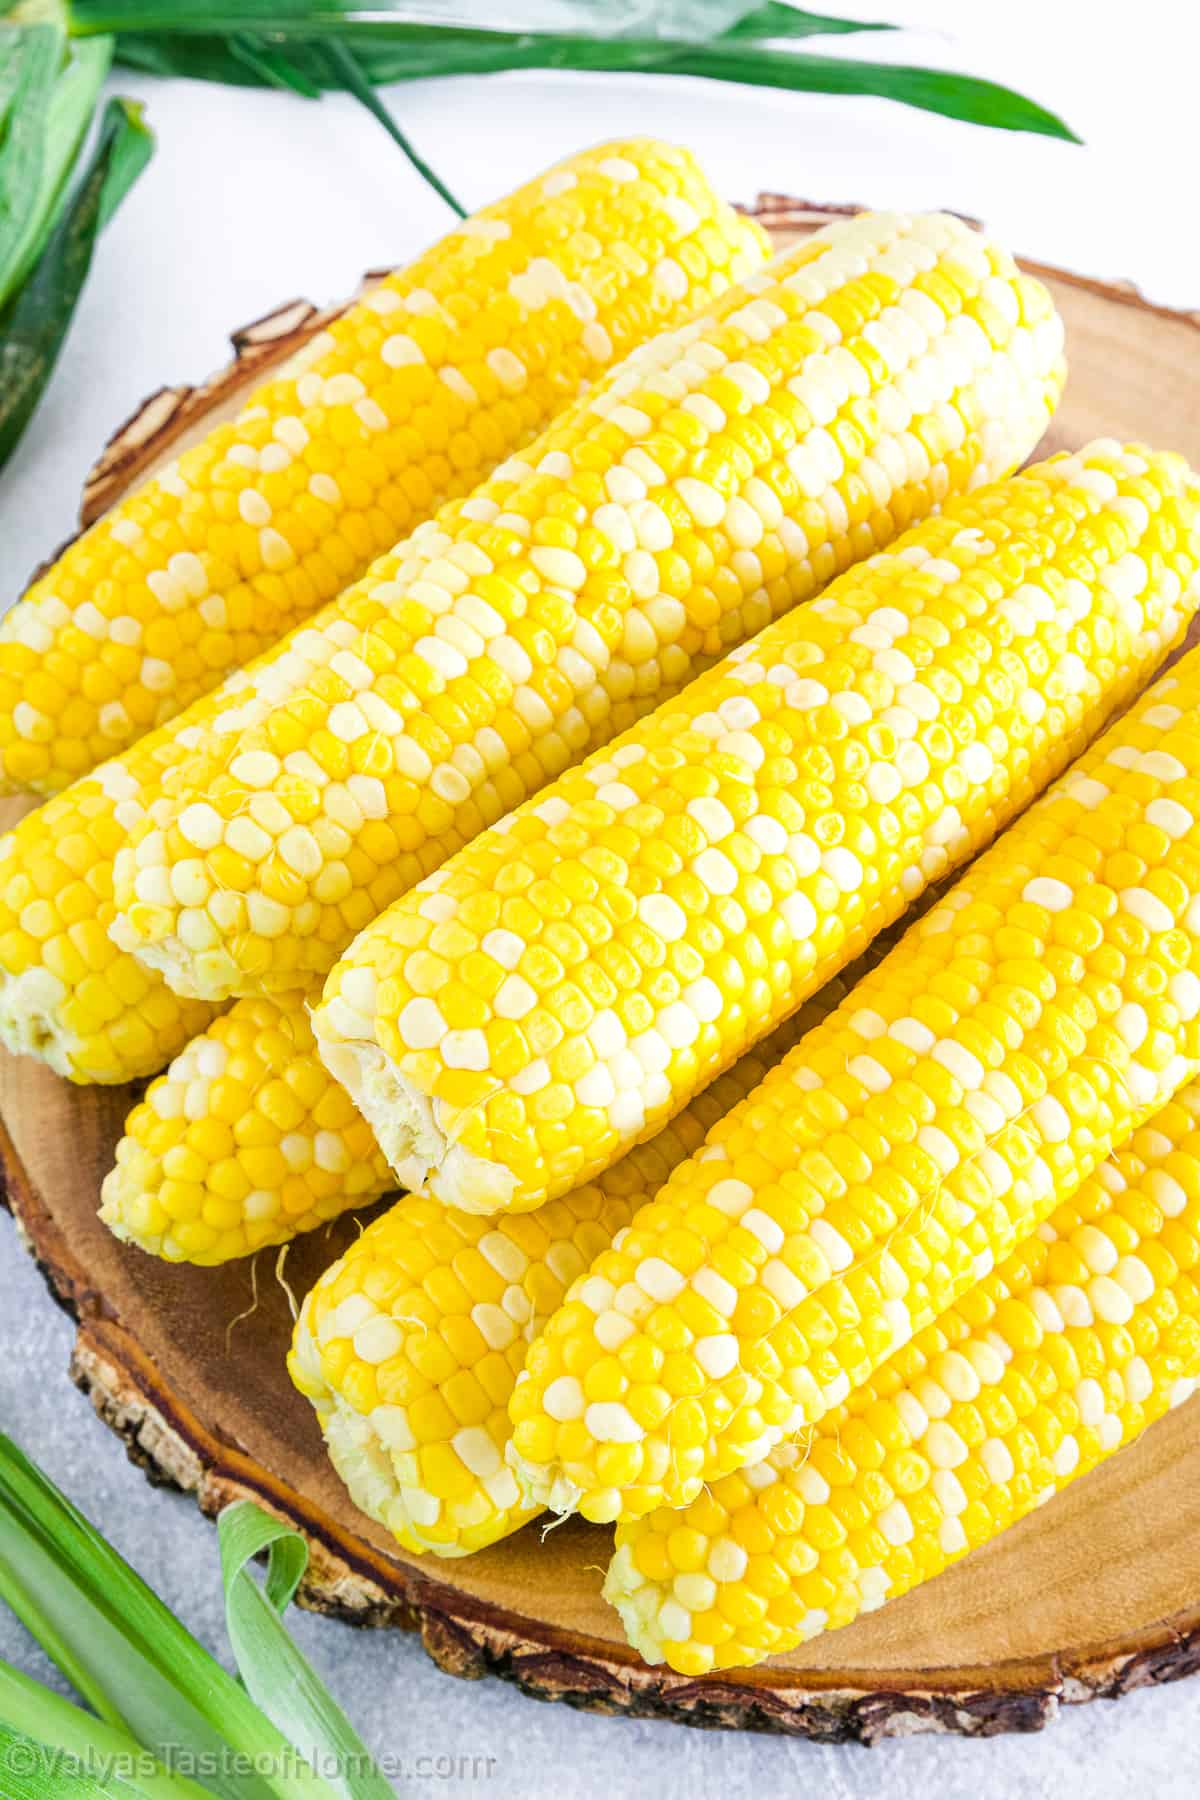 The secret to the perfect corn on the cob lies in selecting fresh and plump corn that is in season.